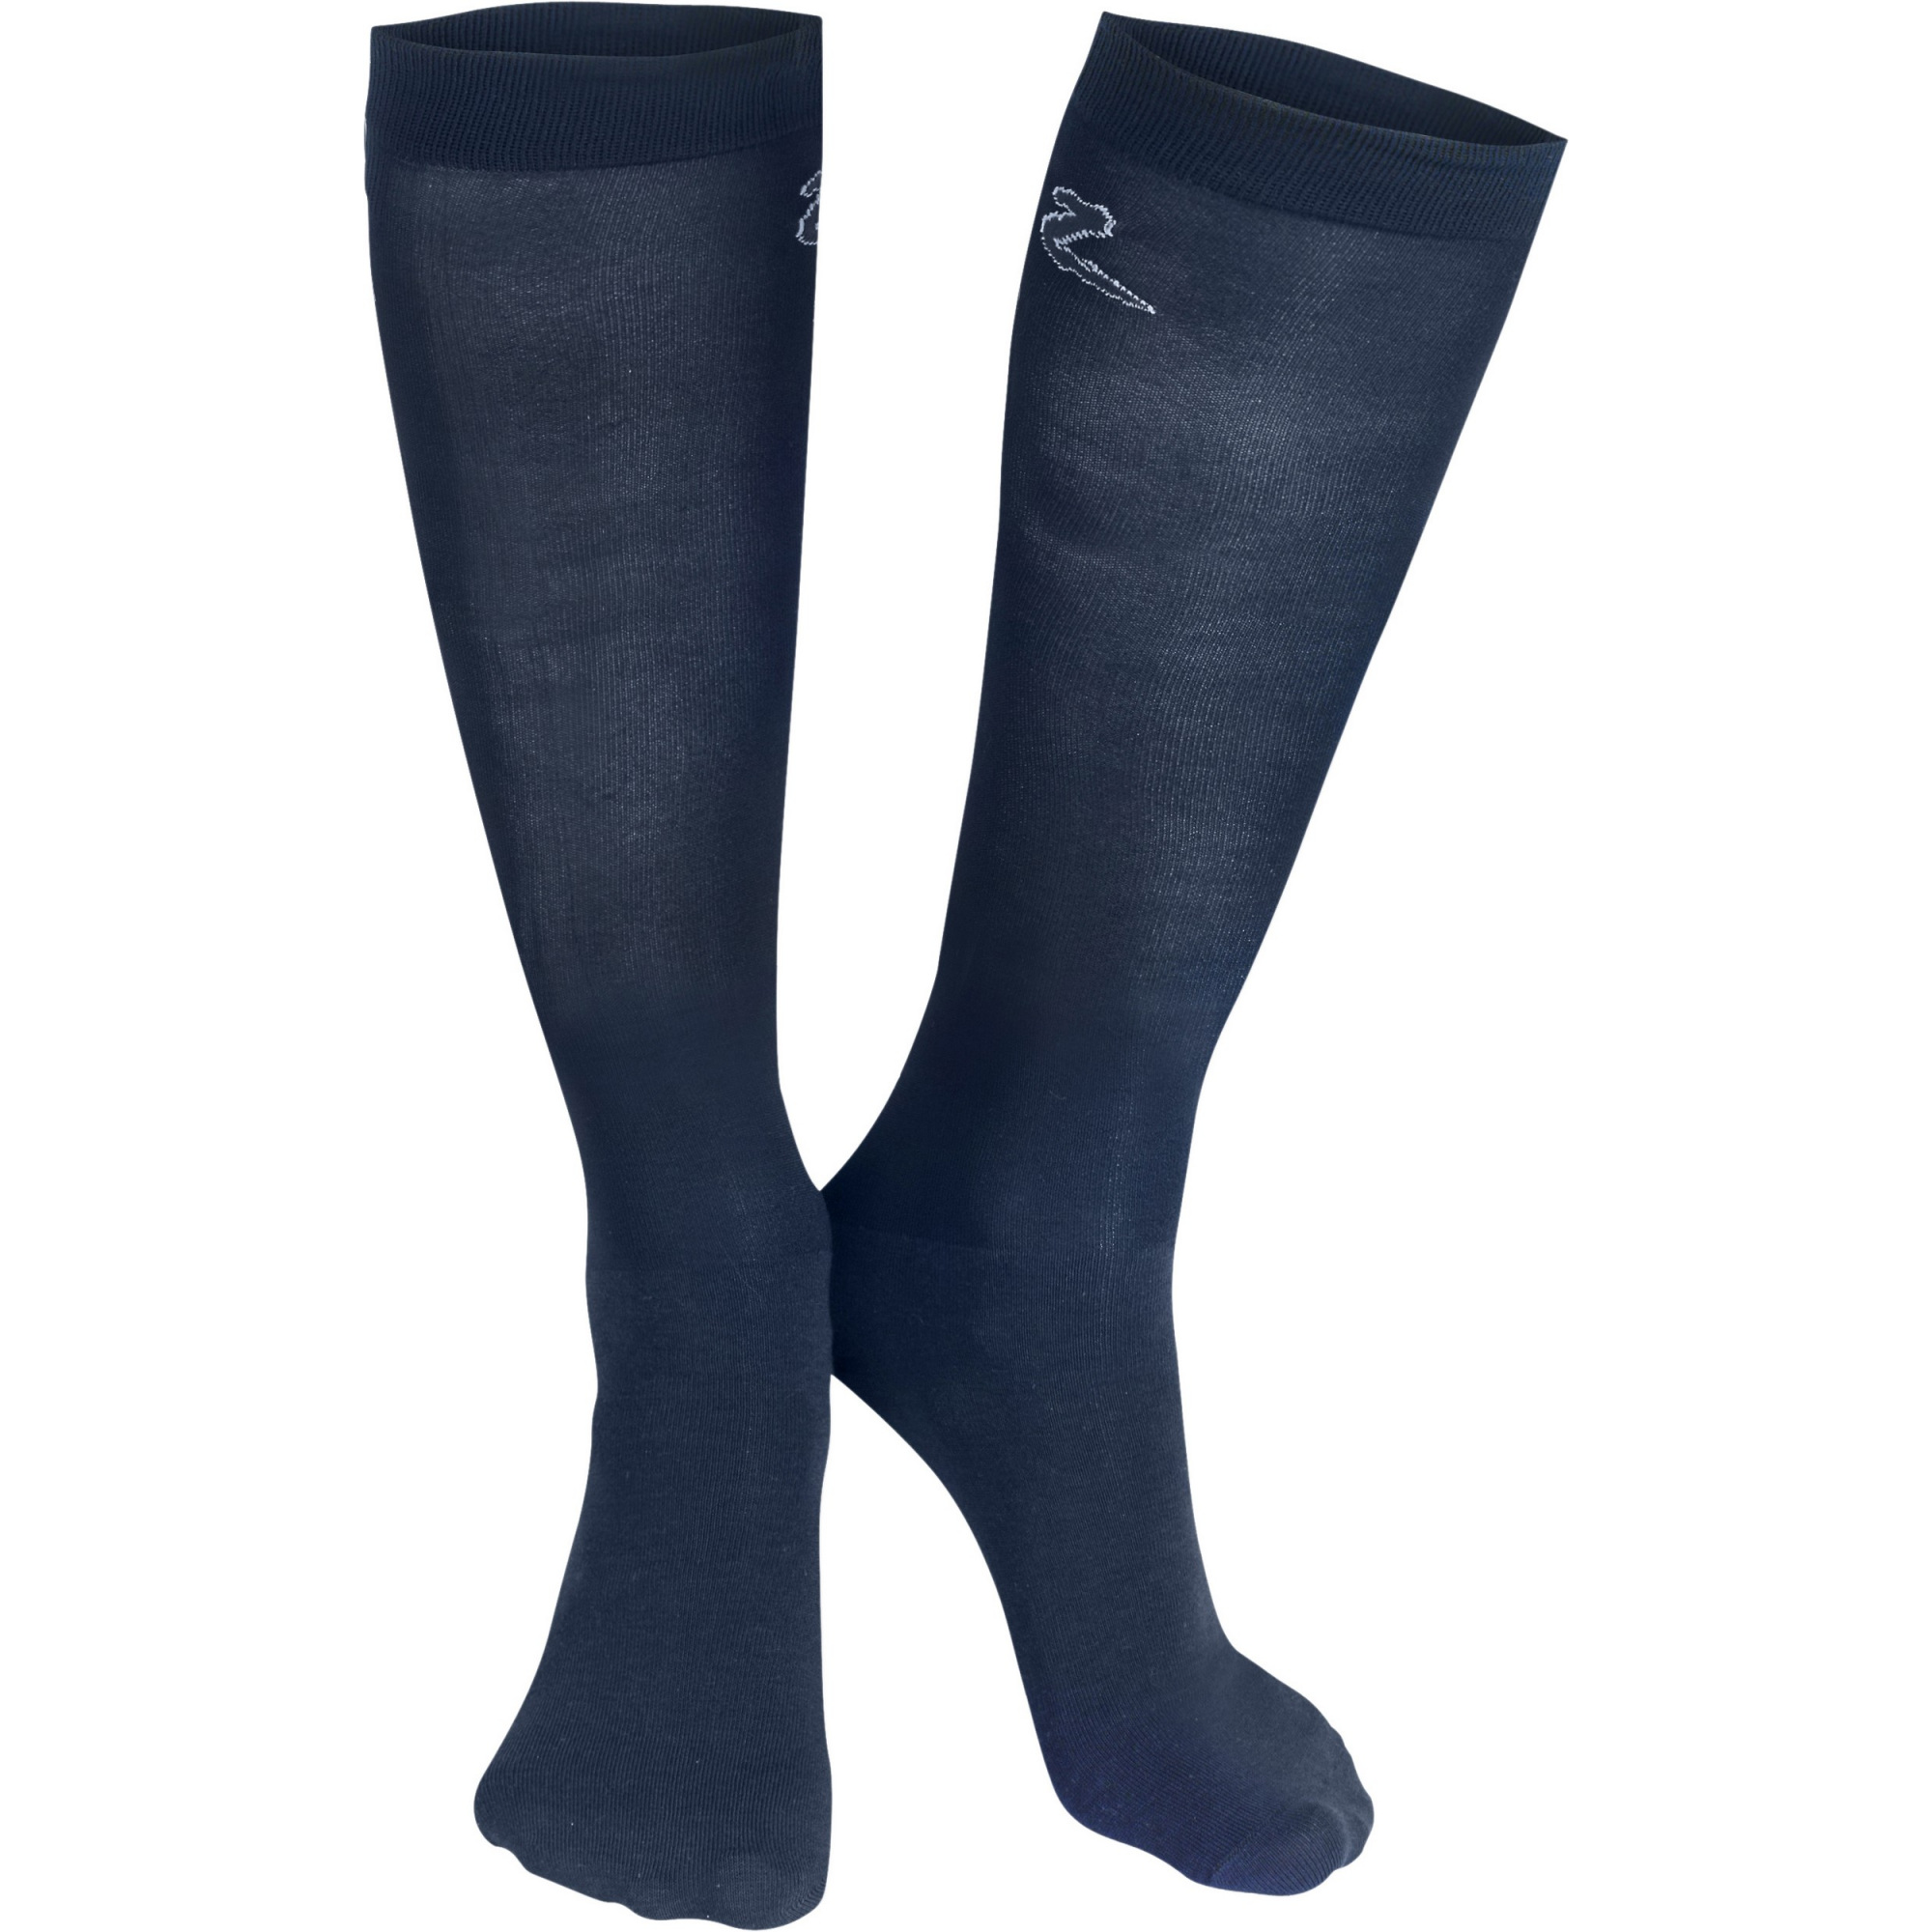 HORZE COMPETITION RIDING SOCKS, 2 PACK - EQUISHOP Equestrian Shop